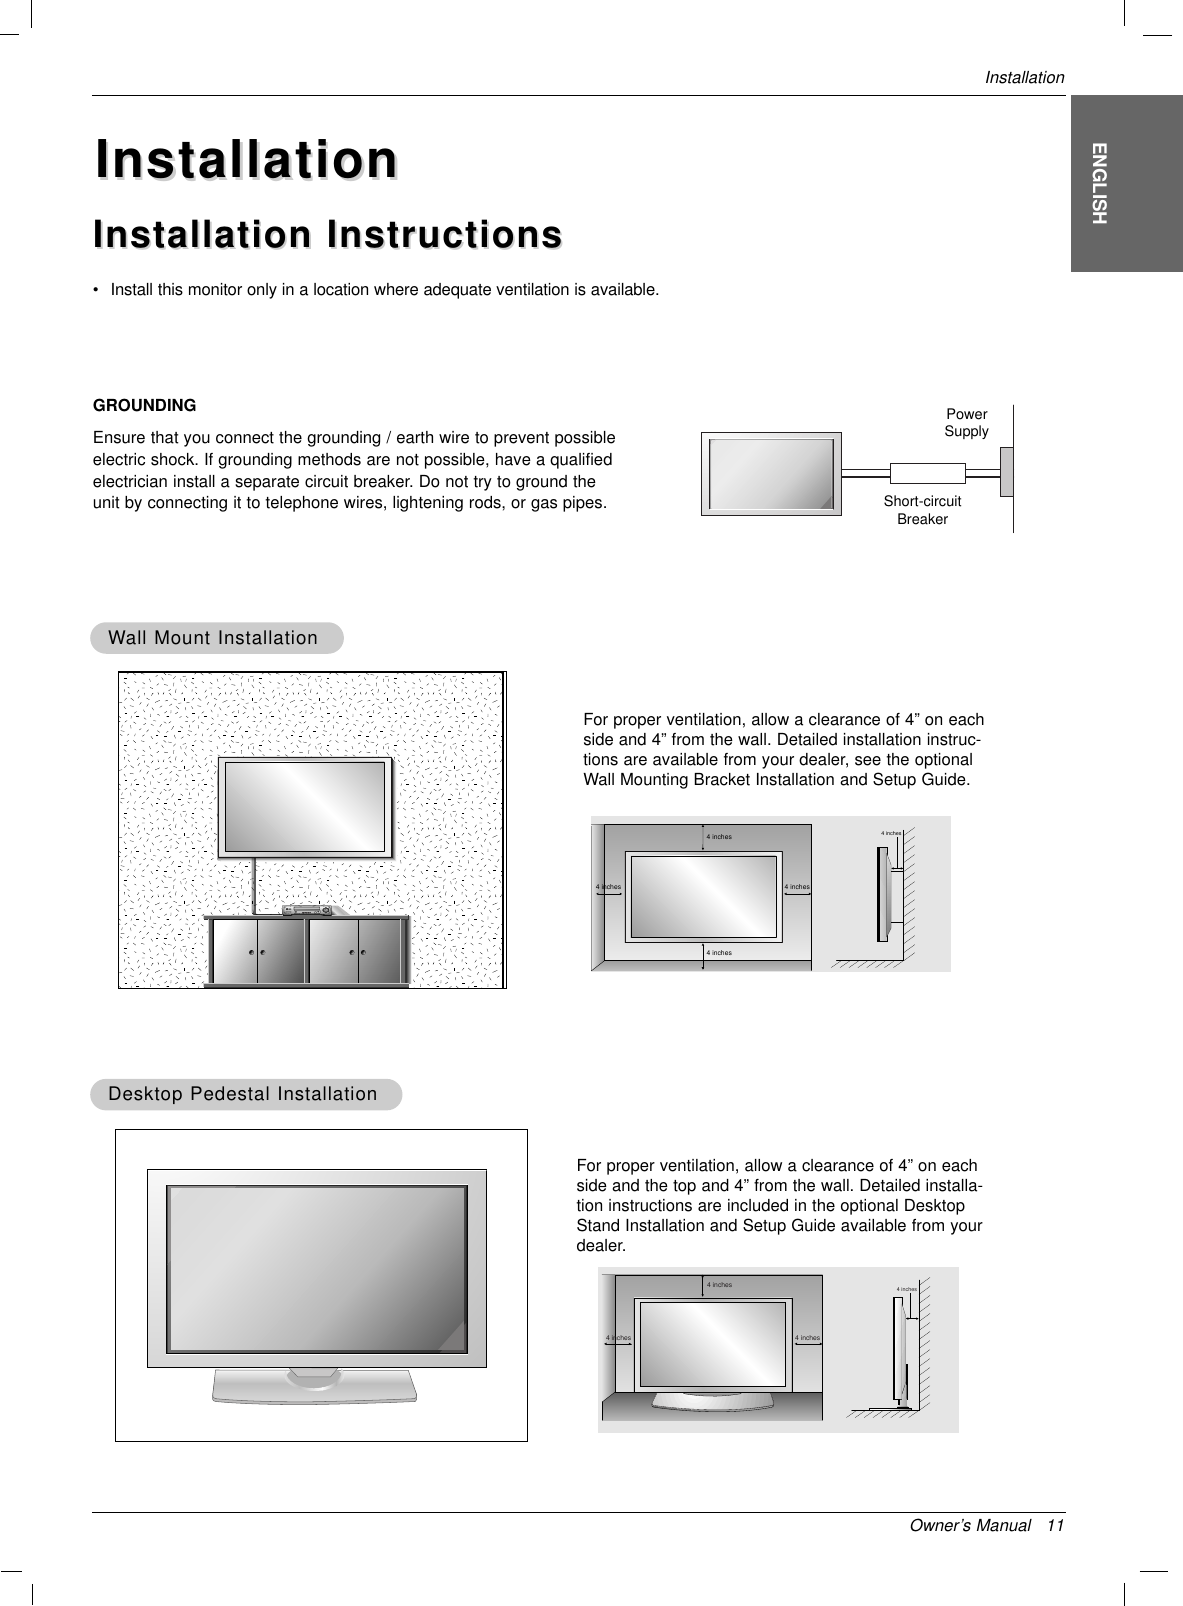 4 inches4 inches4 inches4 inches4 inchesWWall Mount Installationall Mount InstallationFor proper ventilation, allow a clearance of 4” on eachside and 4” from the wall. Detailed installation instruc-tions are available from your dealer, see the optionalWall Mounting Bracket Installation and Setup Guide.•Install this monitor only in a location where adequate ventilation is available.GROUNDINGEnsure that you connect the grounding / earth wire to prevent possibleelectric shock. If grounding methods are not possible, have a qualifiedelectrician install a separate circuit breaker. Do not try to ground theunit by connecting it to telephone wires, lightening rods, or gas pipes.PowerSupplyShort-circuitBreaker4 inches 4 inches4 inches4 inchesDesktop Pedestal InstallationDesktop Pedestal InstallationFor proper ventilation, allow a clearance of 4” on eachside and the top and 4” from the wall. Detailed installa-tion instructions are included in the optional DesktopStand Installation and Setup Guide available from yourdealer.InstallationInstallationInstallation InstructionsInstallation InstructionsOwner’s Manual   11InstallationENGLISH